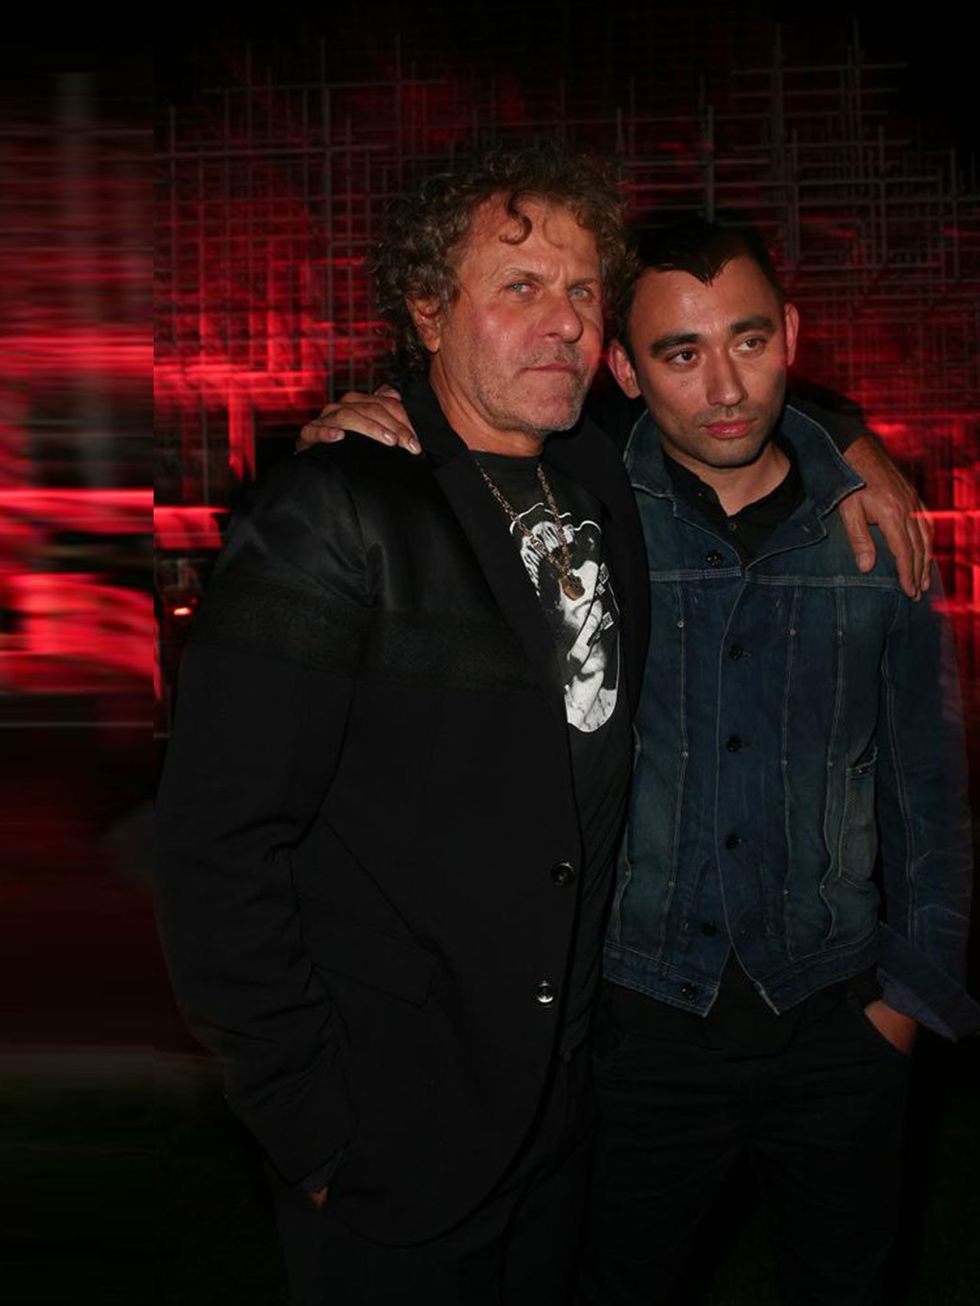 <p>Diesel founder Renzo Rosso with Diesel artistic director Nicola Formichetti at The Serpentine Gallery &amp; Diesel Future Contemporaries party at The Serpentine Gallery, London, September 2013.</p><p><a href="http://www.elleuk.com/catwalk">All the late